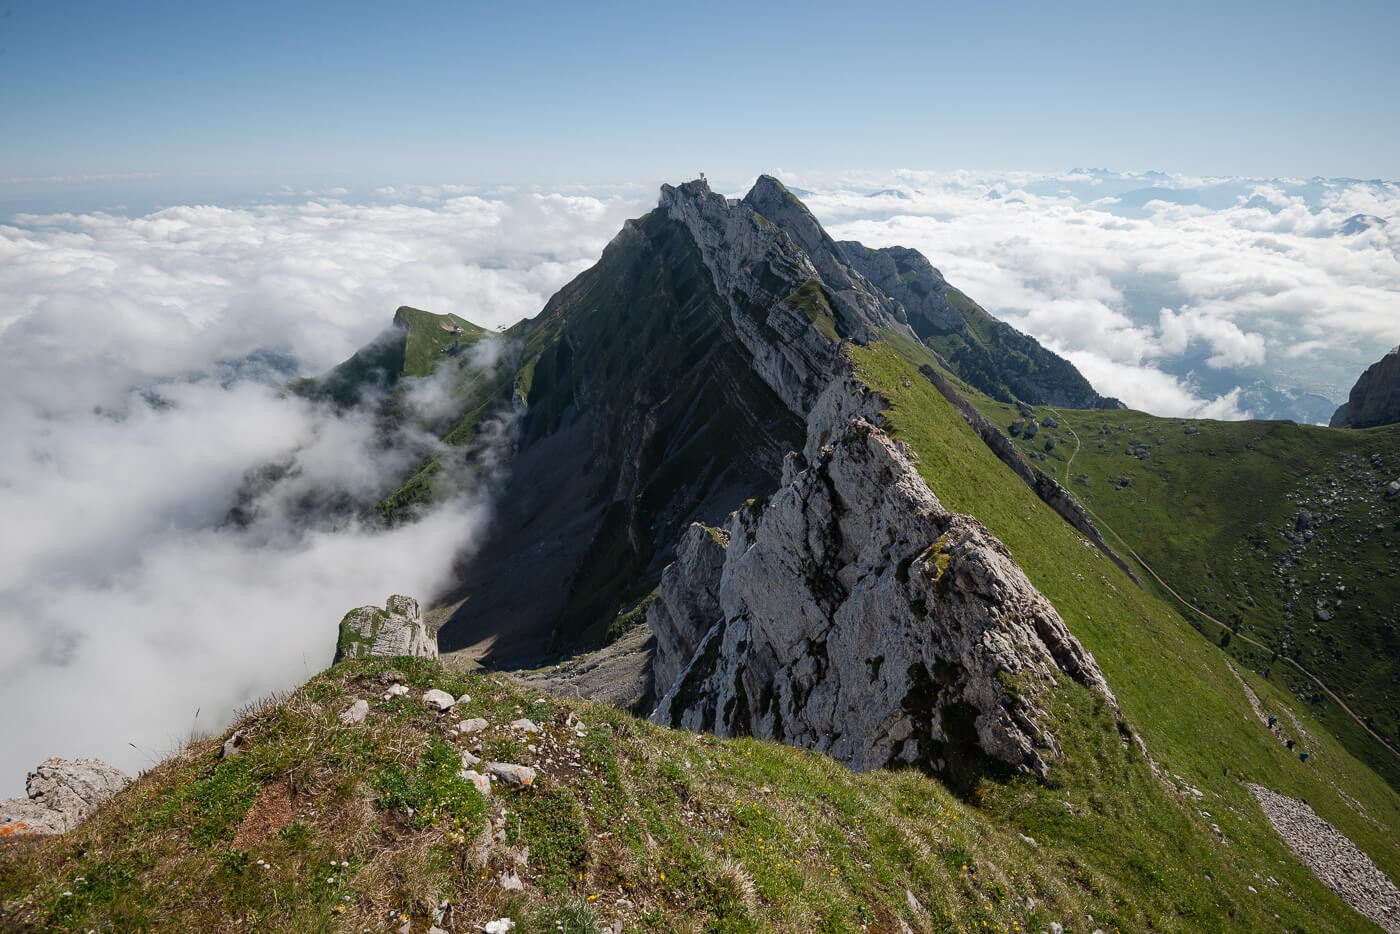 Mount Pilatus viewed from the summit of Mount Tomlishorn, rising above a sea of clouds